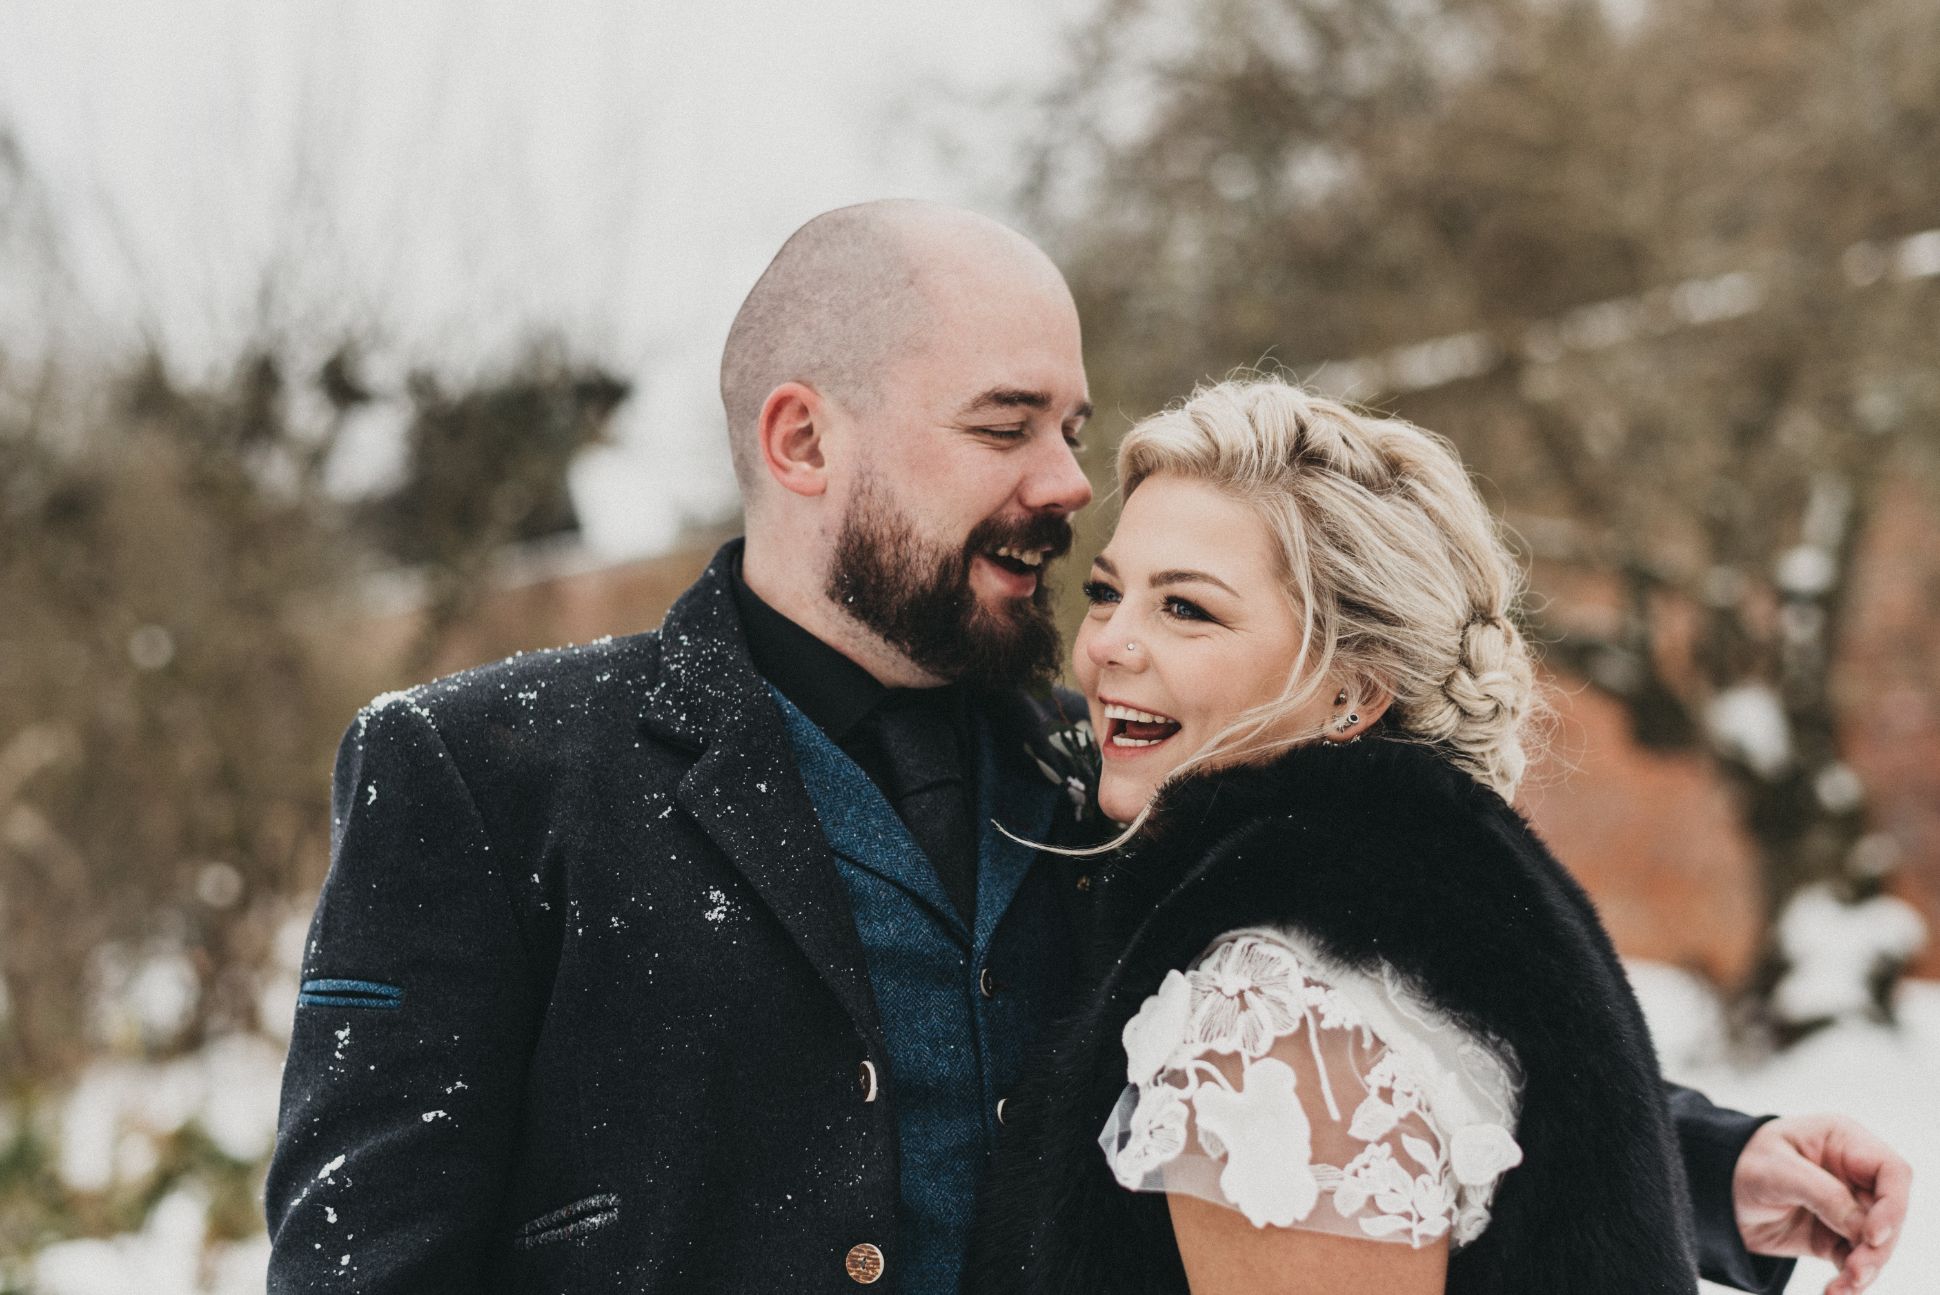 Newlyweds smiling in snow